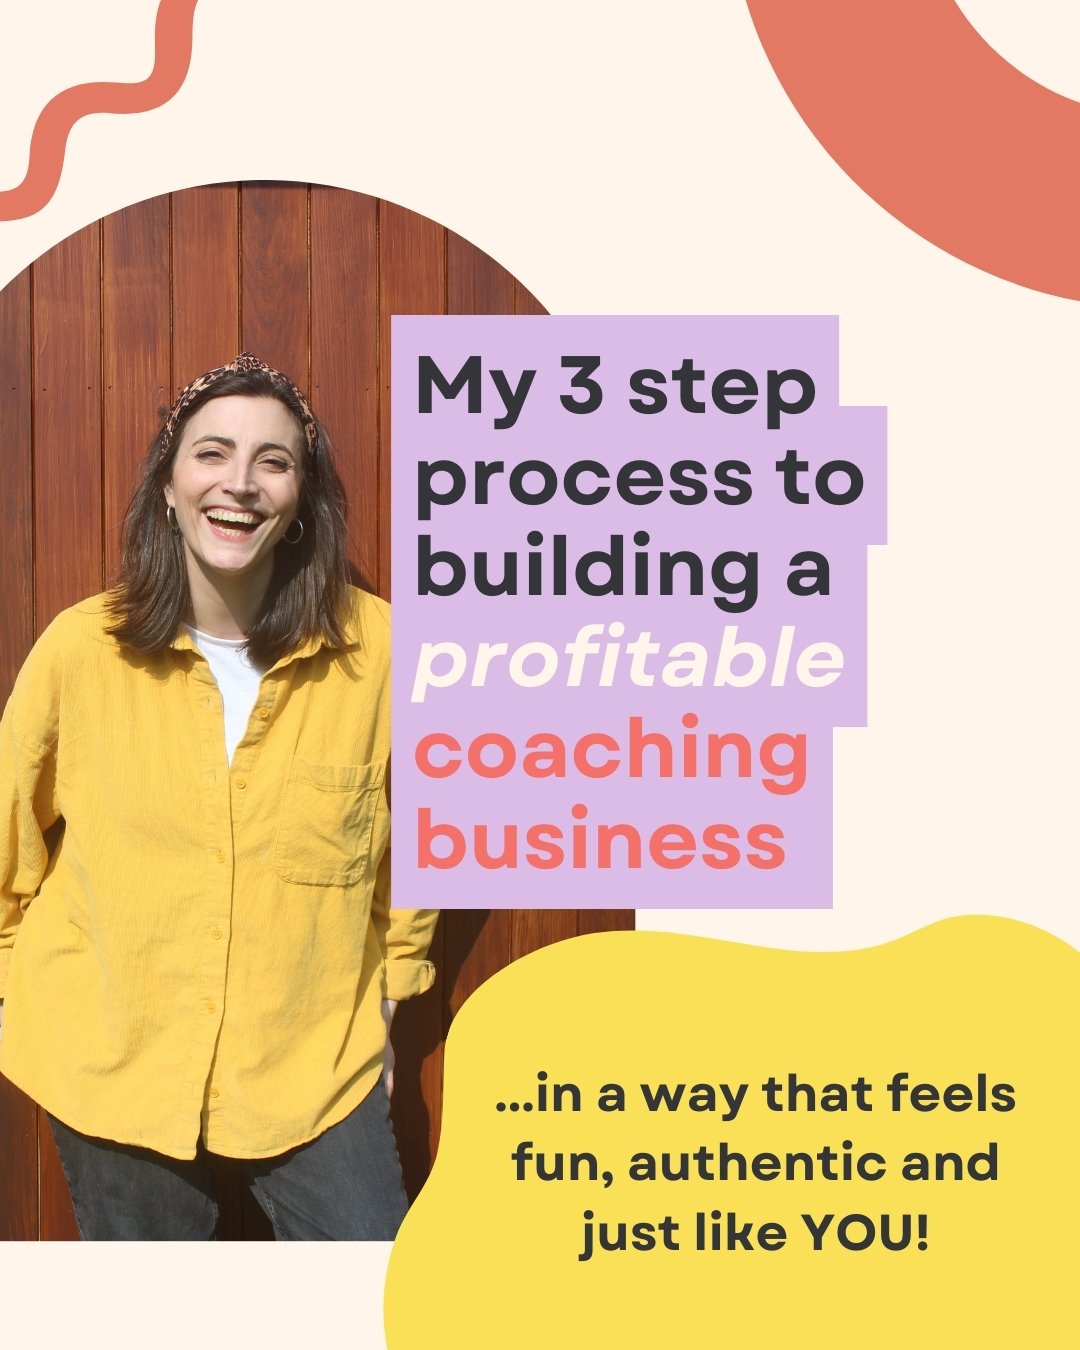 This is my tried and tested 3-step method to building a profitable coaching business that feels fun, authentic, and just like you! 🎉✨

1. Clarify 🔍 --&gt; Get crystal clear on who you are as a coach, who you help, and why. Create an offer that spea